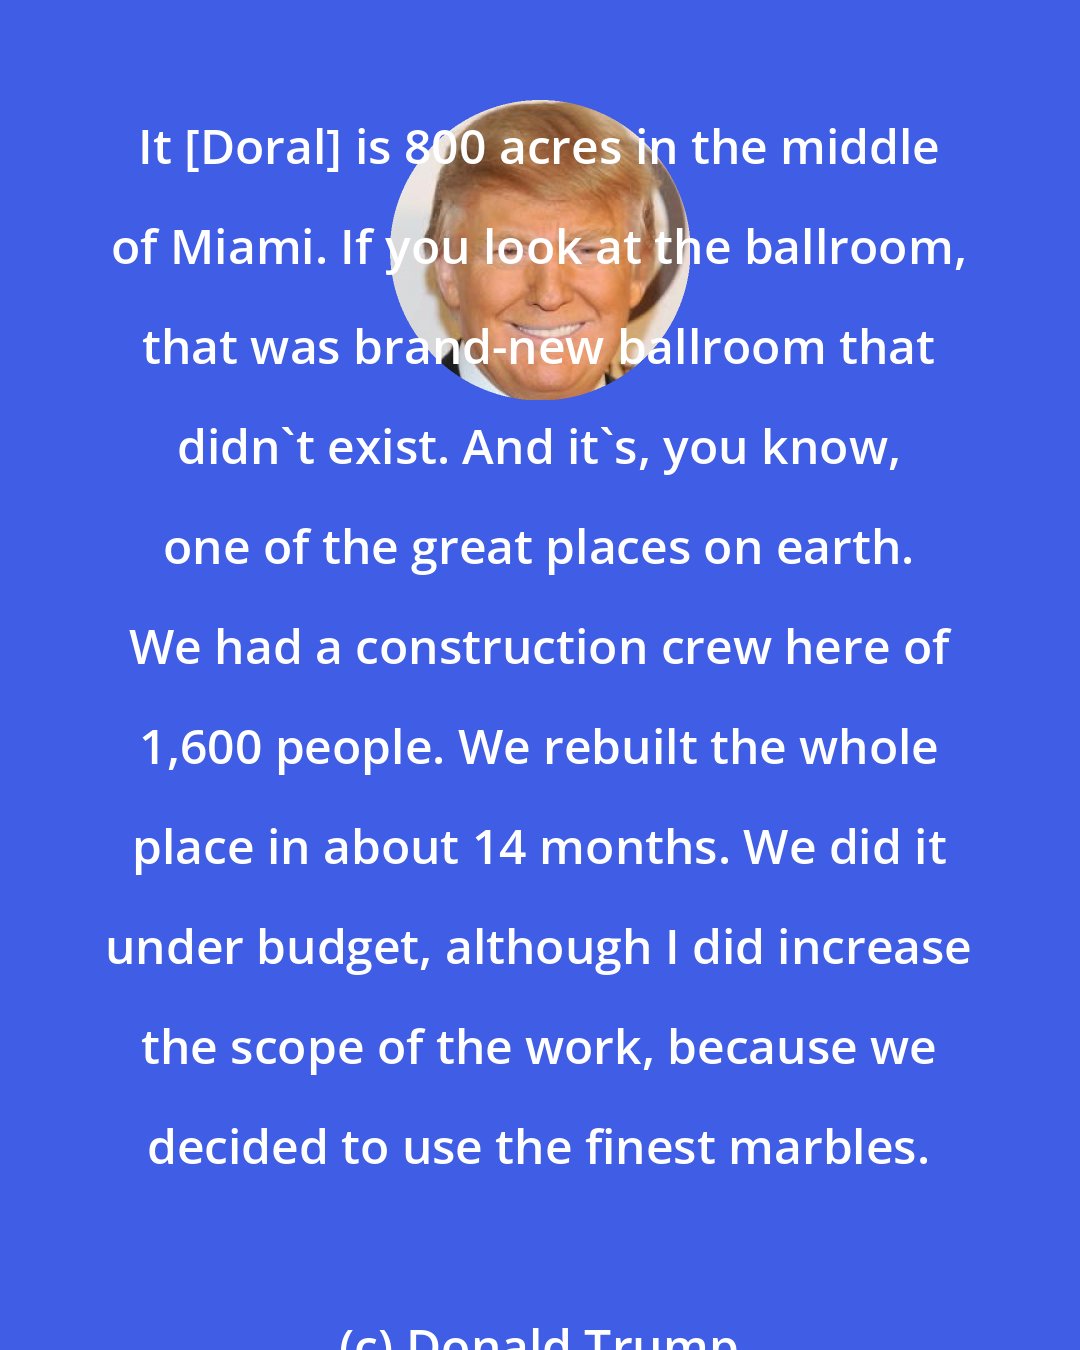 Donald Trump: It [Doral] is 800 acres in the middle of Miami. If you look at the ballroom, that was brand-new ballroom that didn`t exist. And it`s, you know, one of the great places on earth. We had a construction crew here of 1,600 people. We rebuilt the whole place in about 14 months. We did it under budget, although I did increase the scope of the work, because we decided to use the finest marbles.